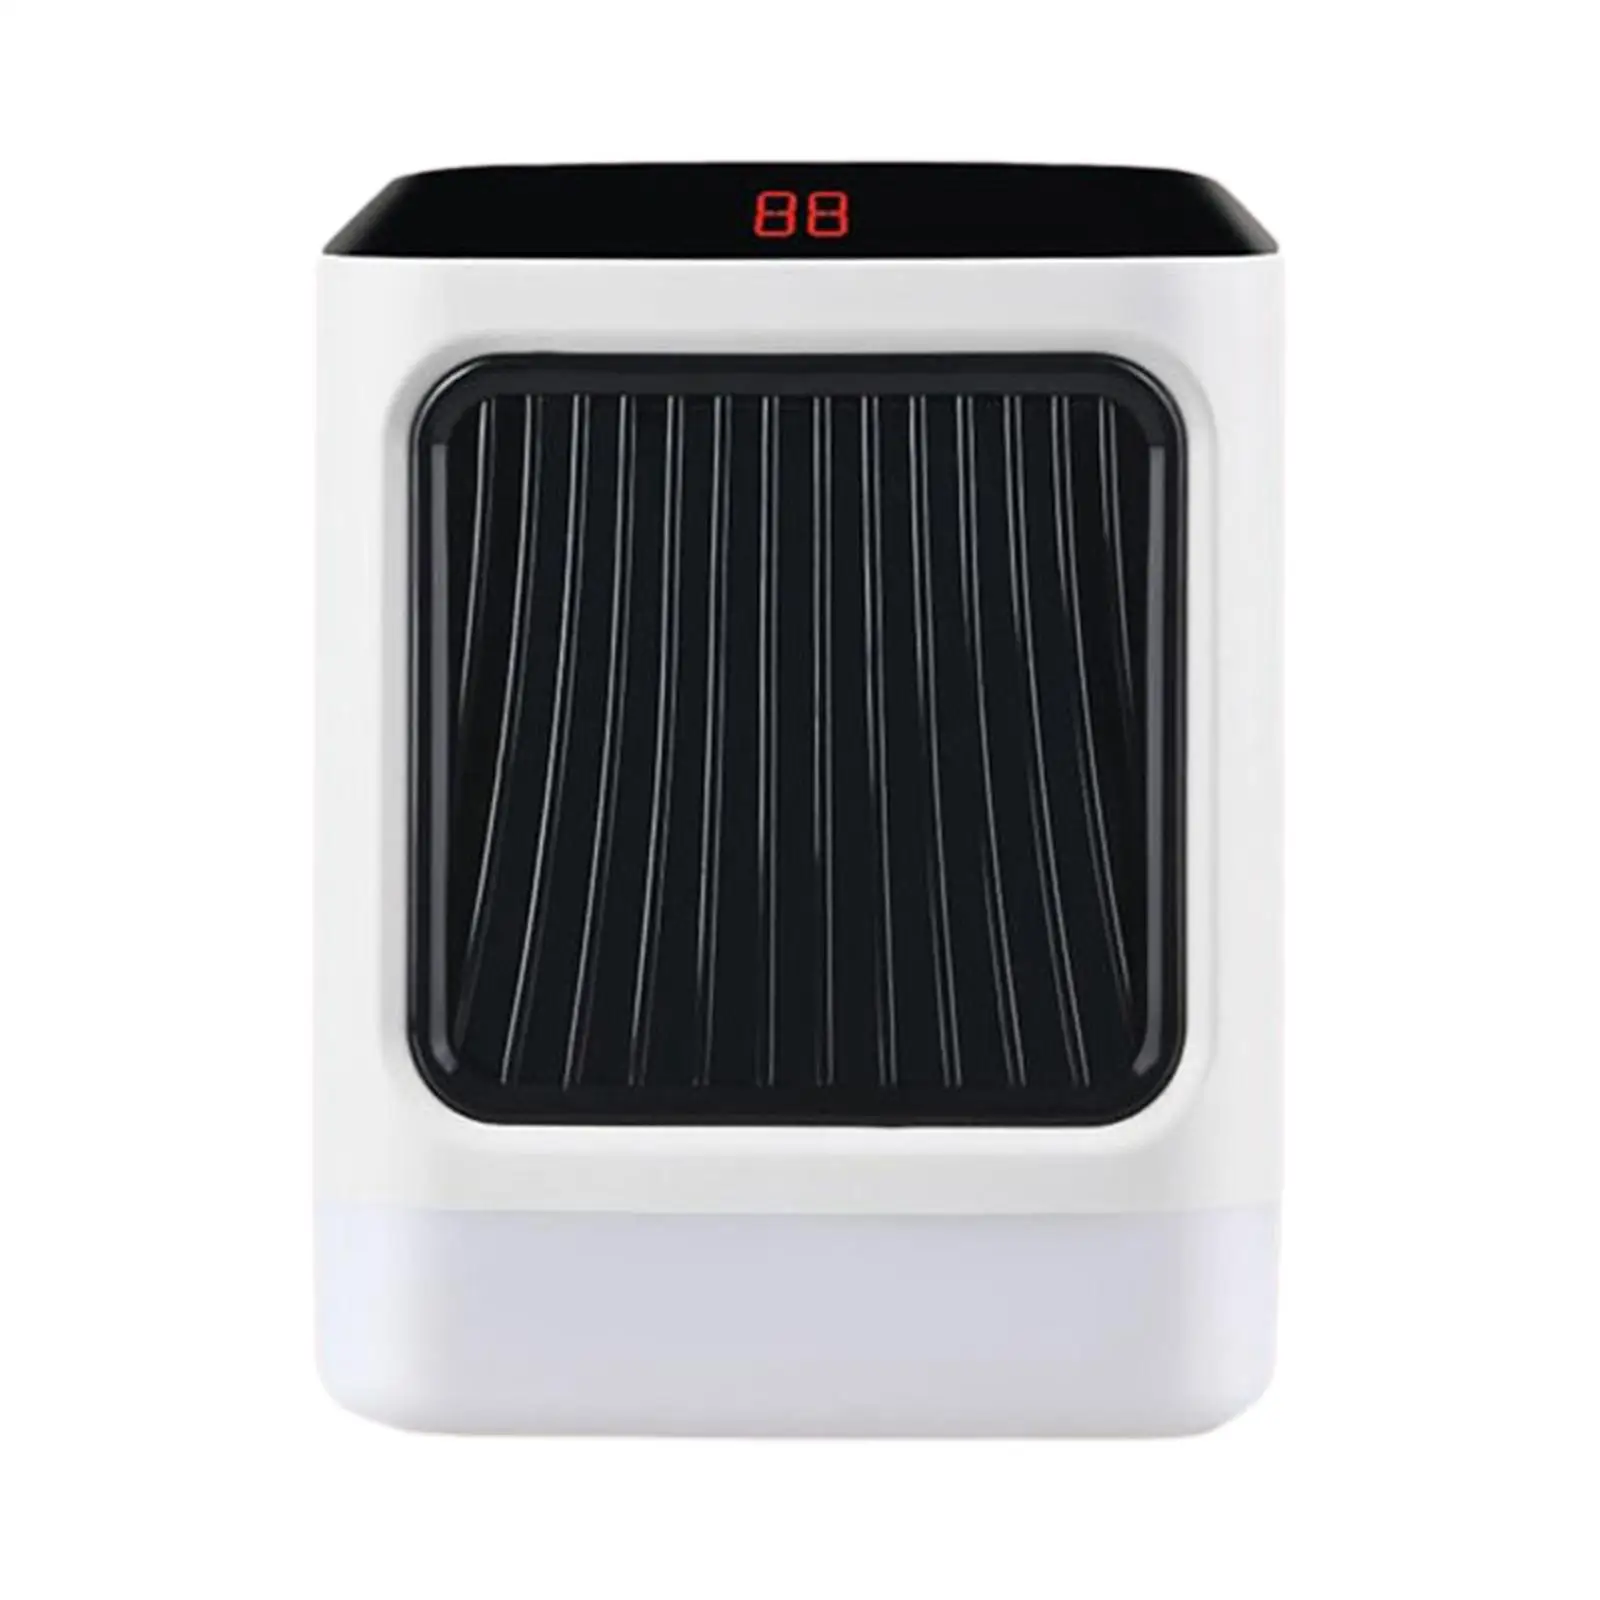 Portable Electric Heater Thermostat Night Light Timer Fast Heating 800W Fan Heater for Desk Indoor Use Office Bedroom Home